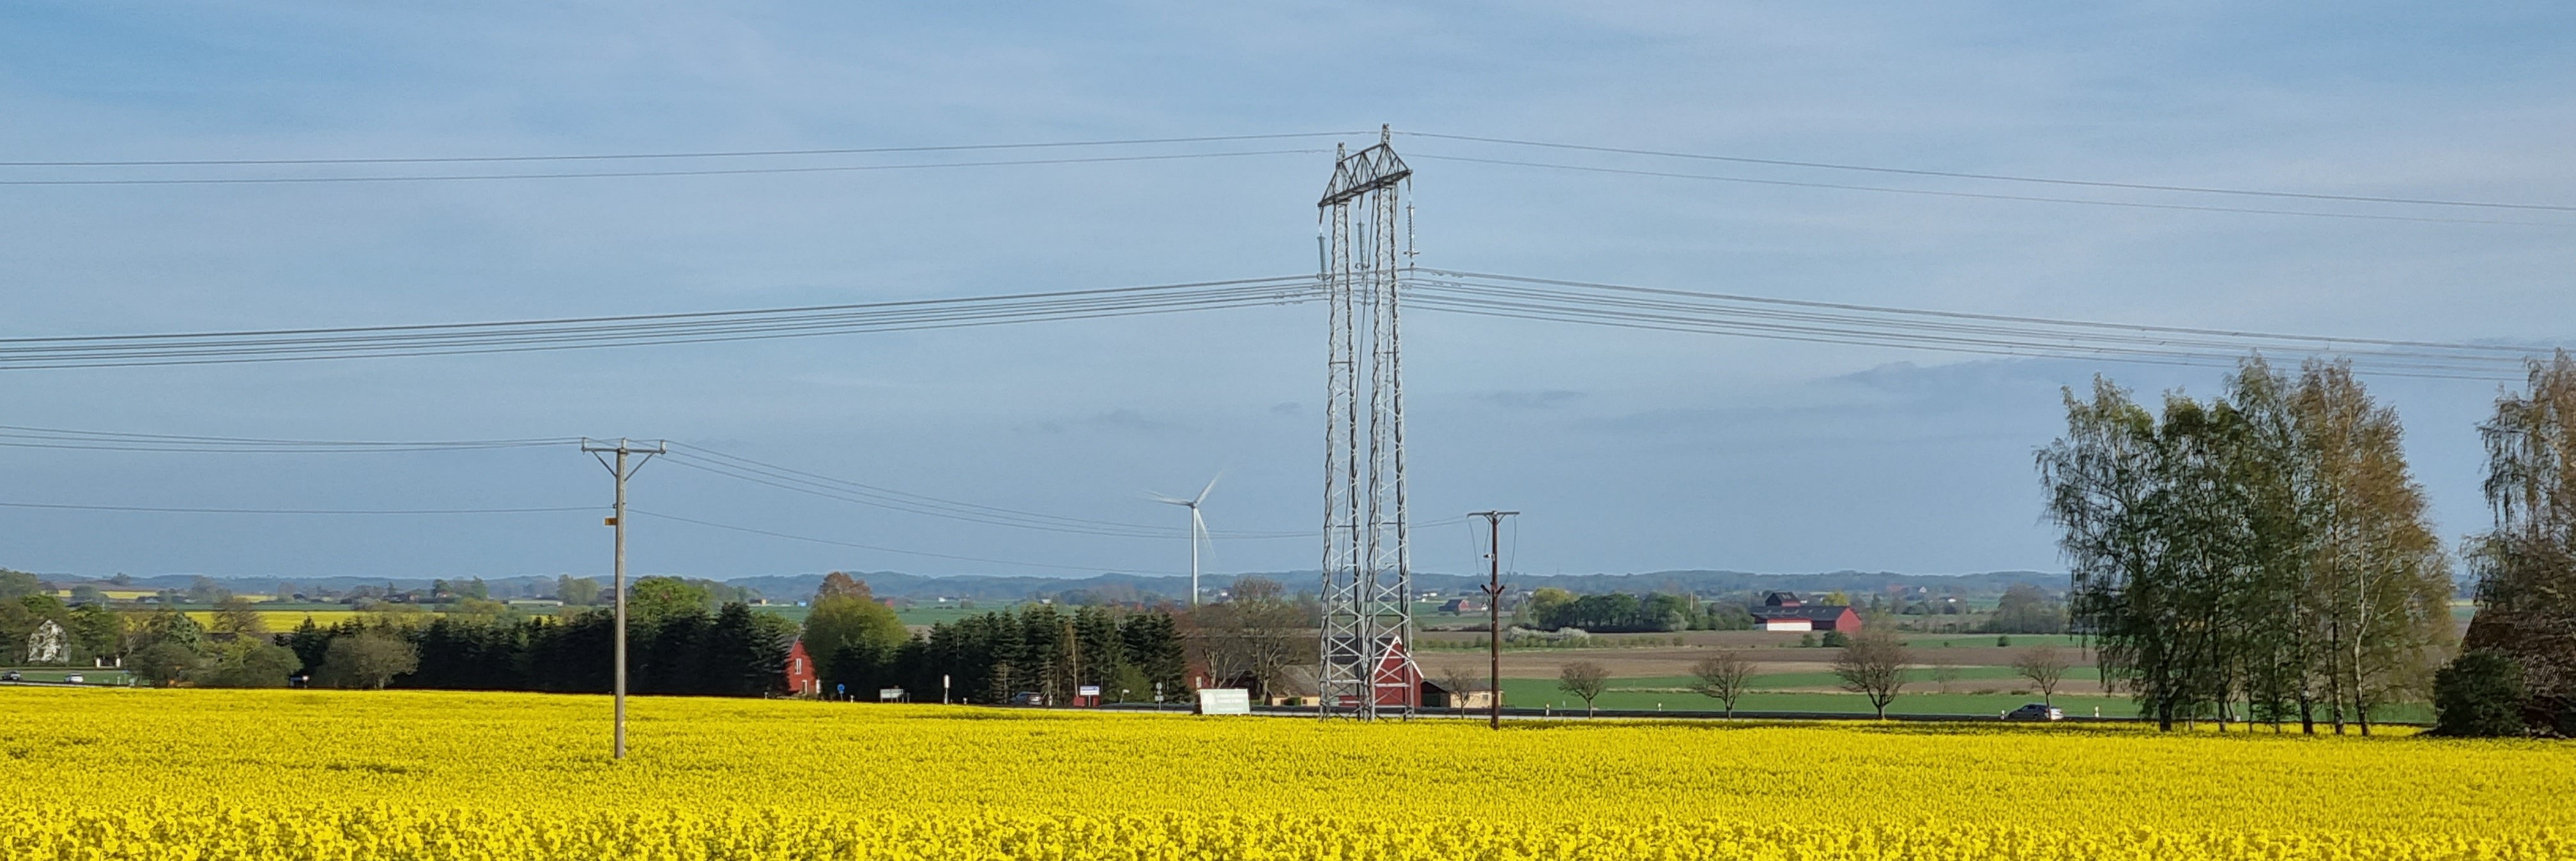 Power lines and yellow field. Photo.